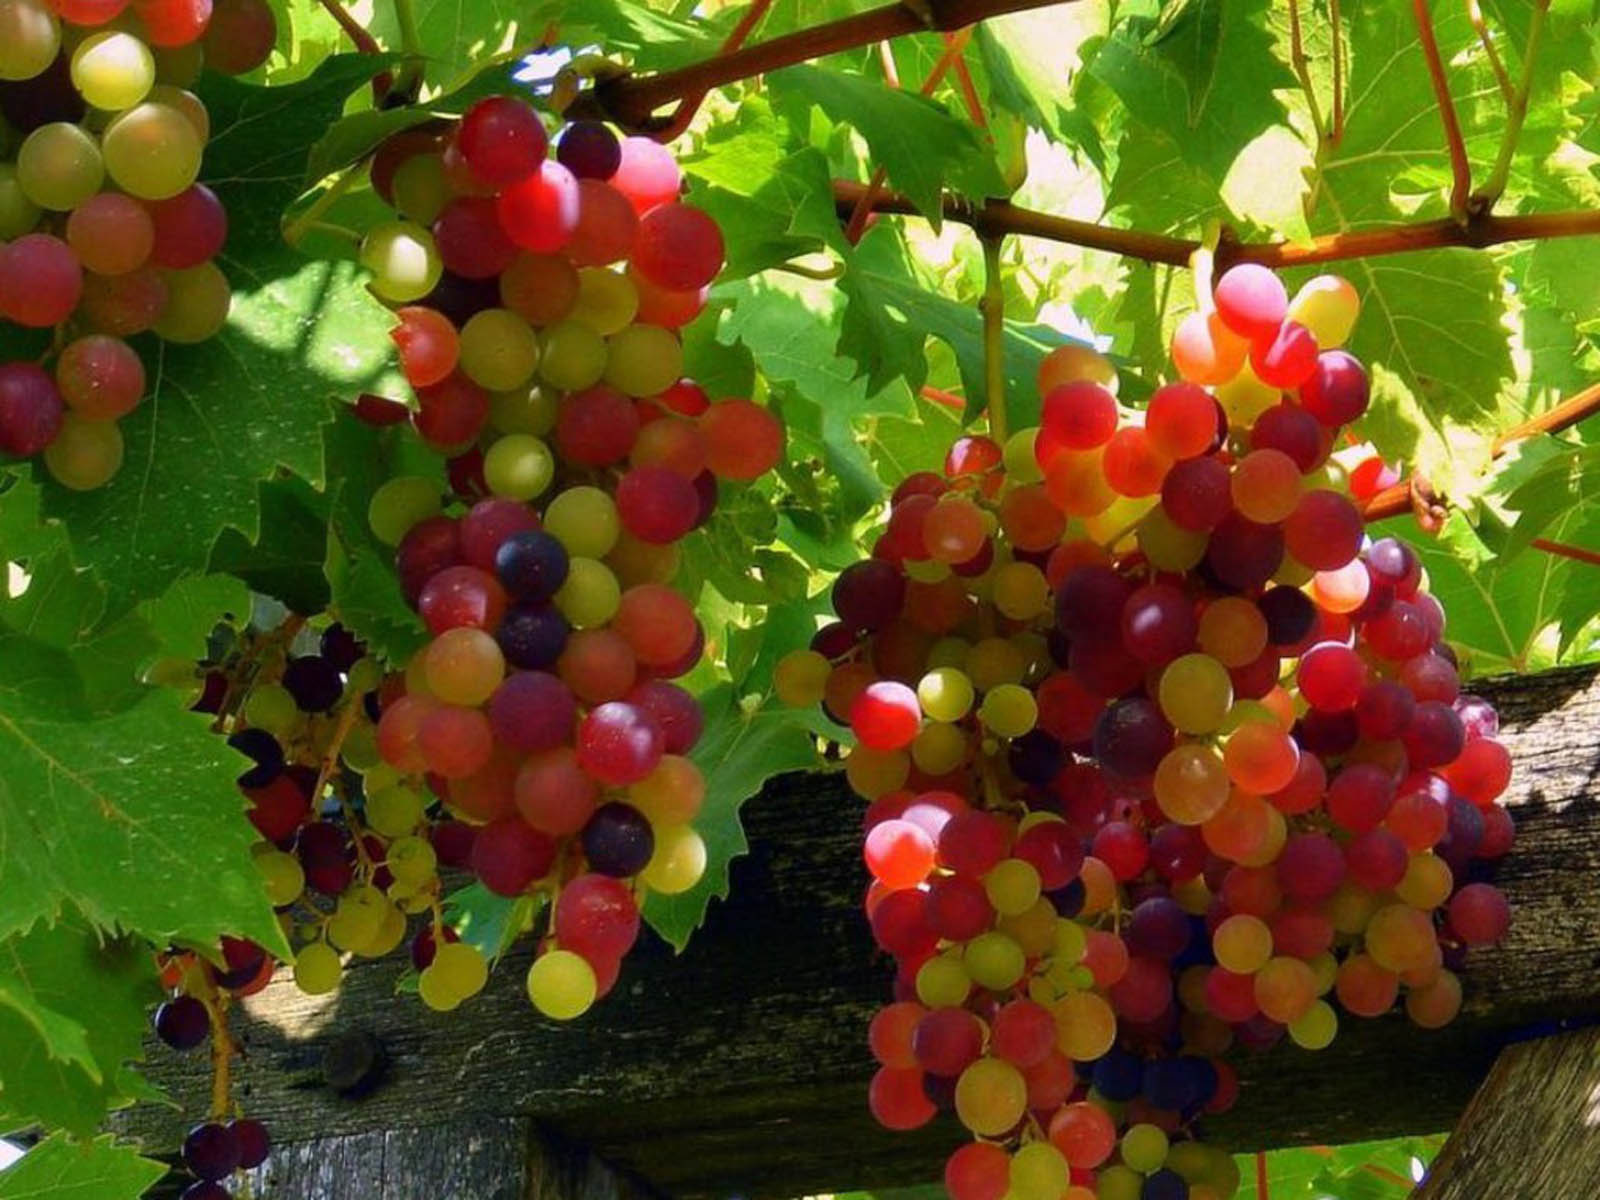 Tag Red Grapes Wallpaper Image Photos Pictures And Background